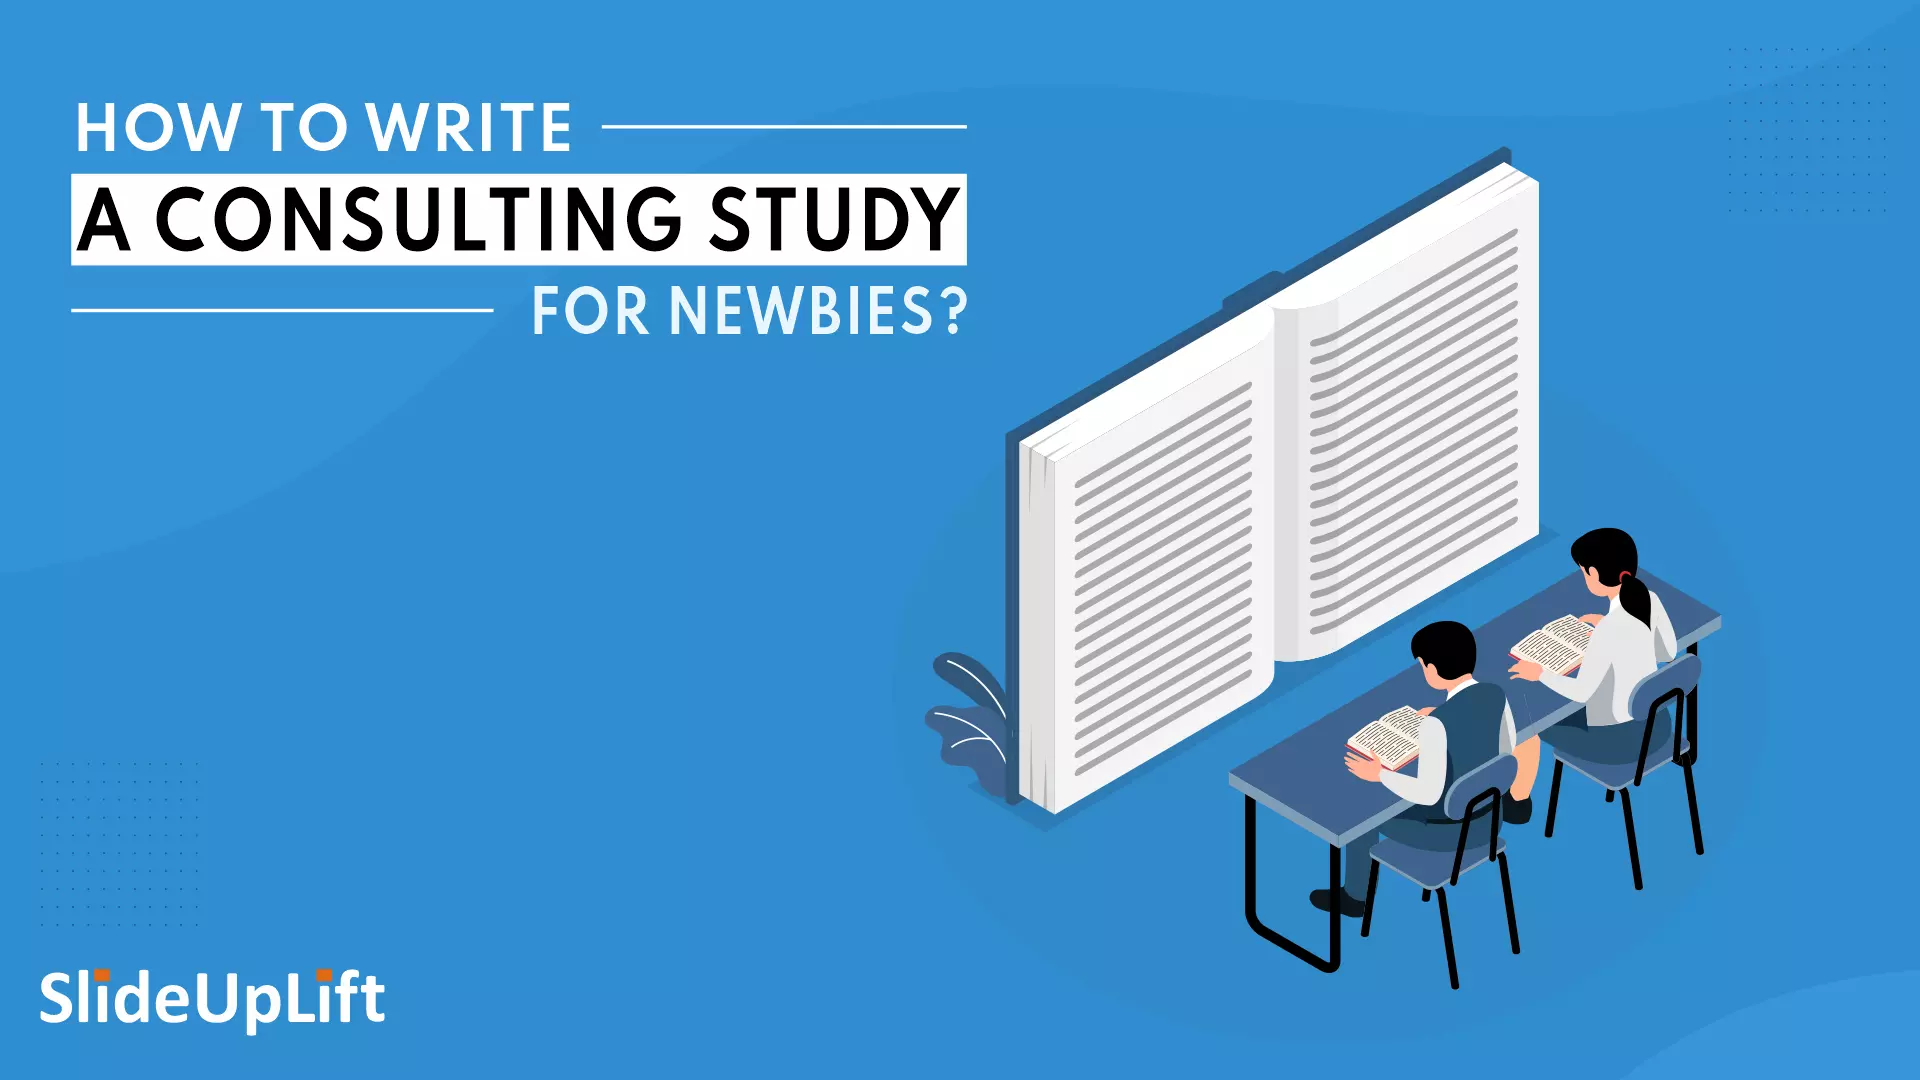 How To Write a Consulting Study For Newbies?